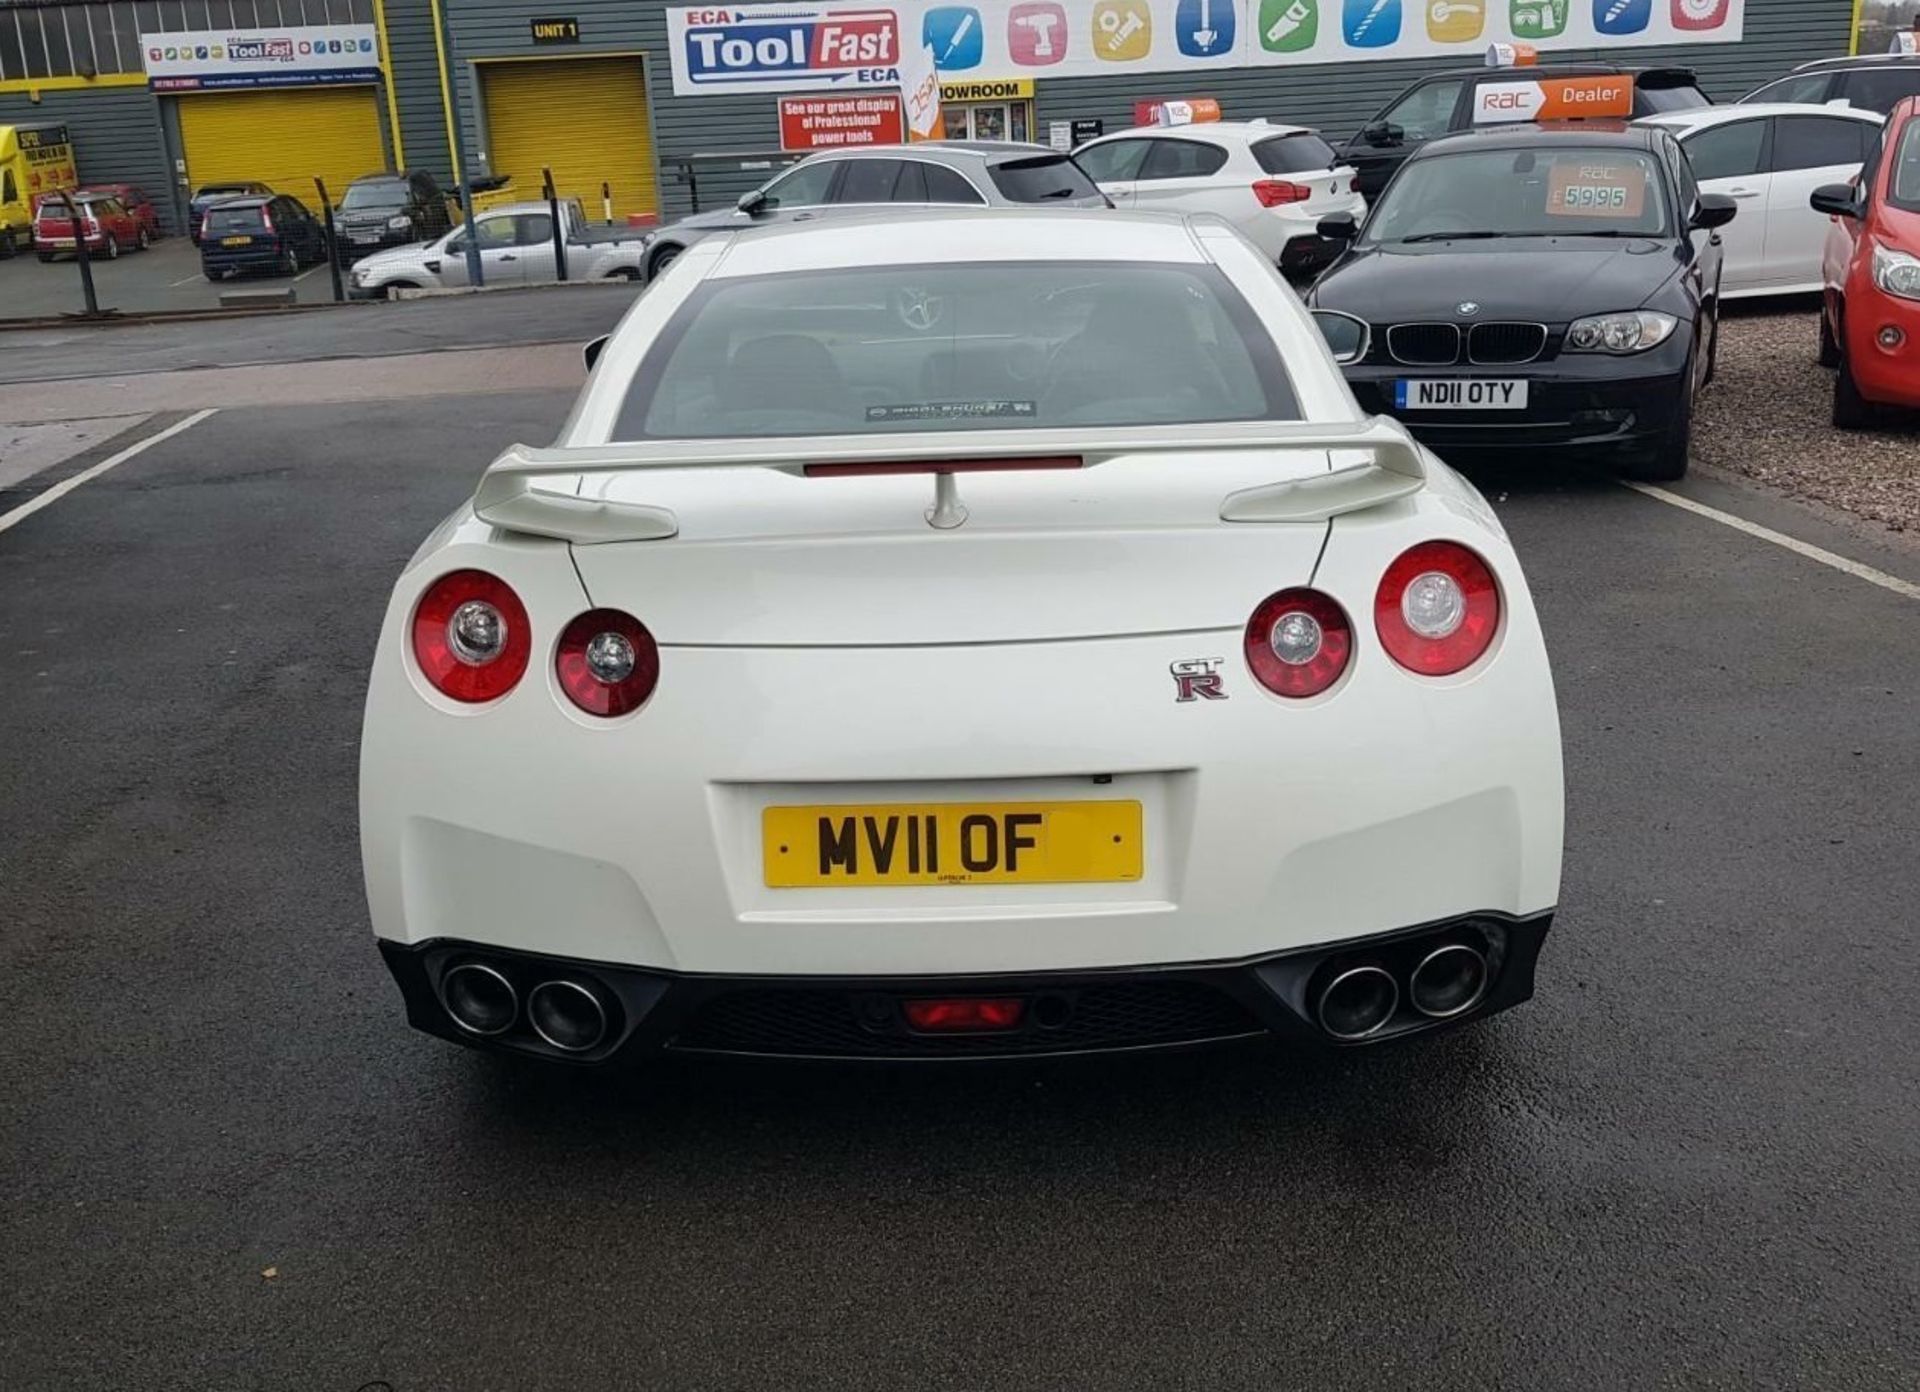 2011 NISSAN GT-R R35 750 stage 5 PREMIUM EDITION S-A 1 OWNER FROM NEW 20K MILES WARRANTED! - Bild 5 aus 7